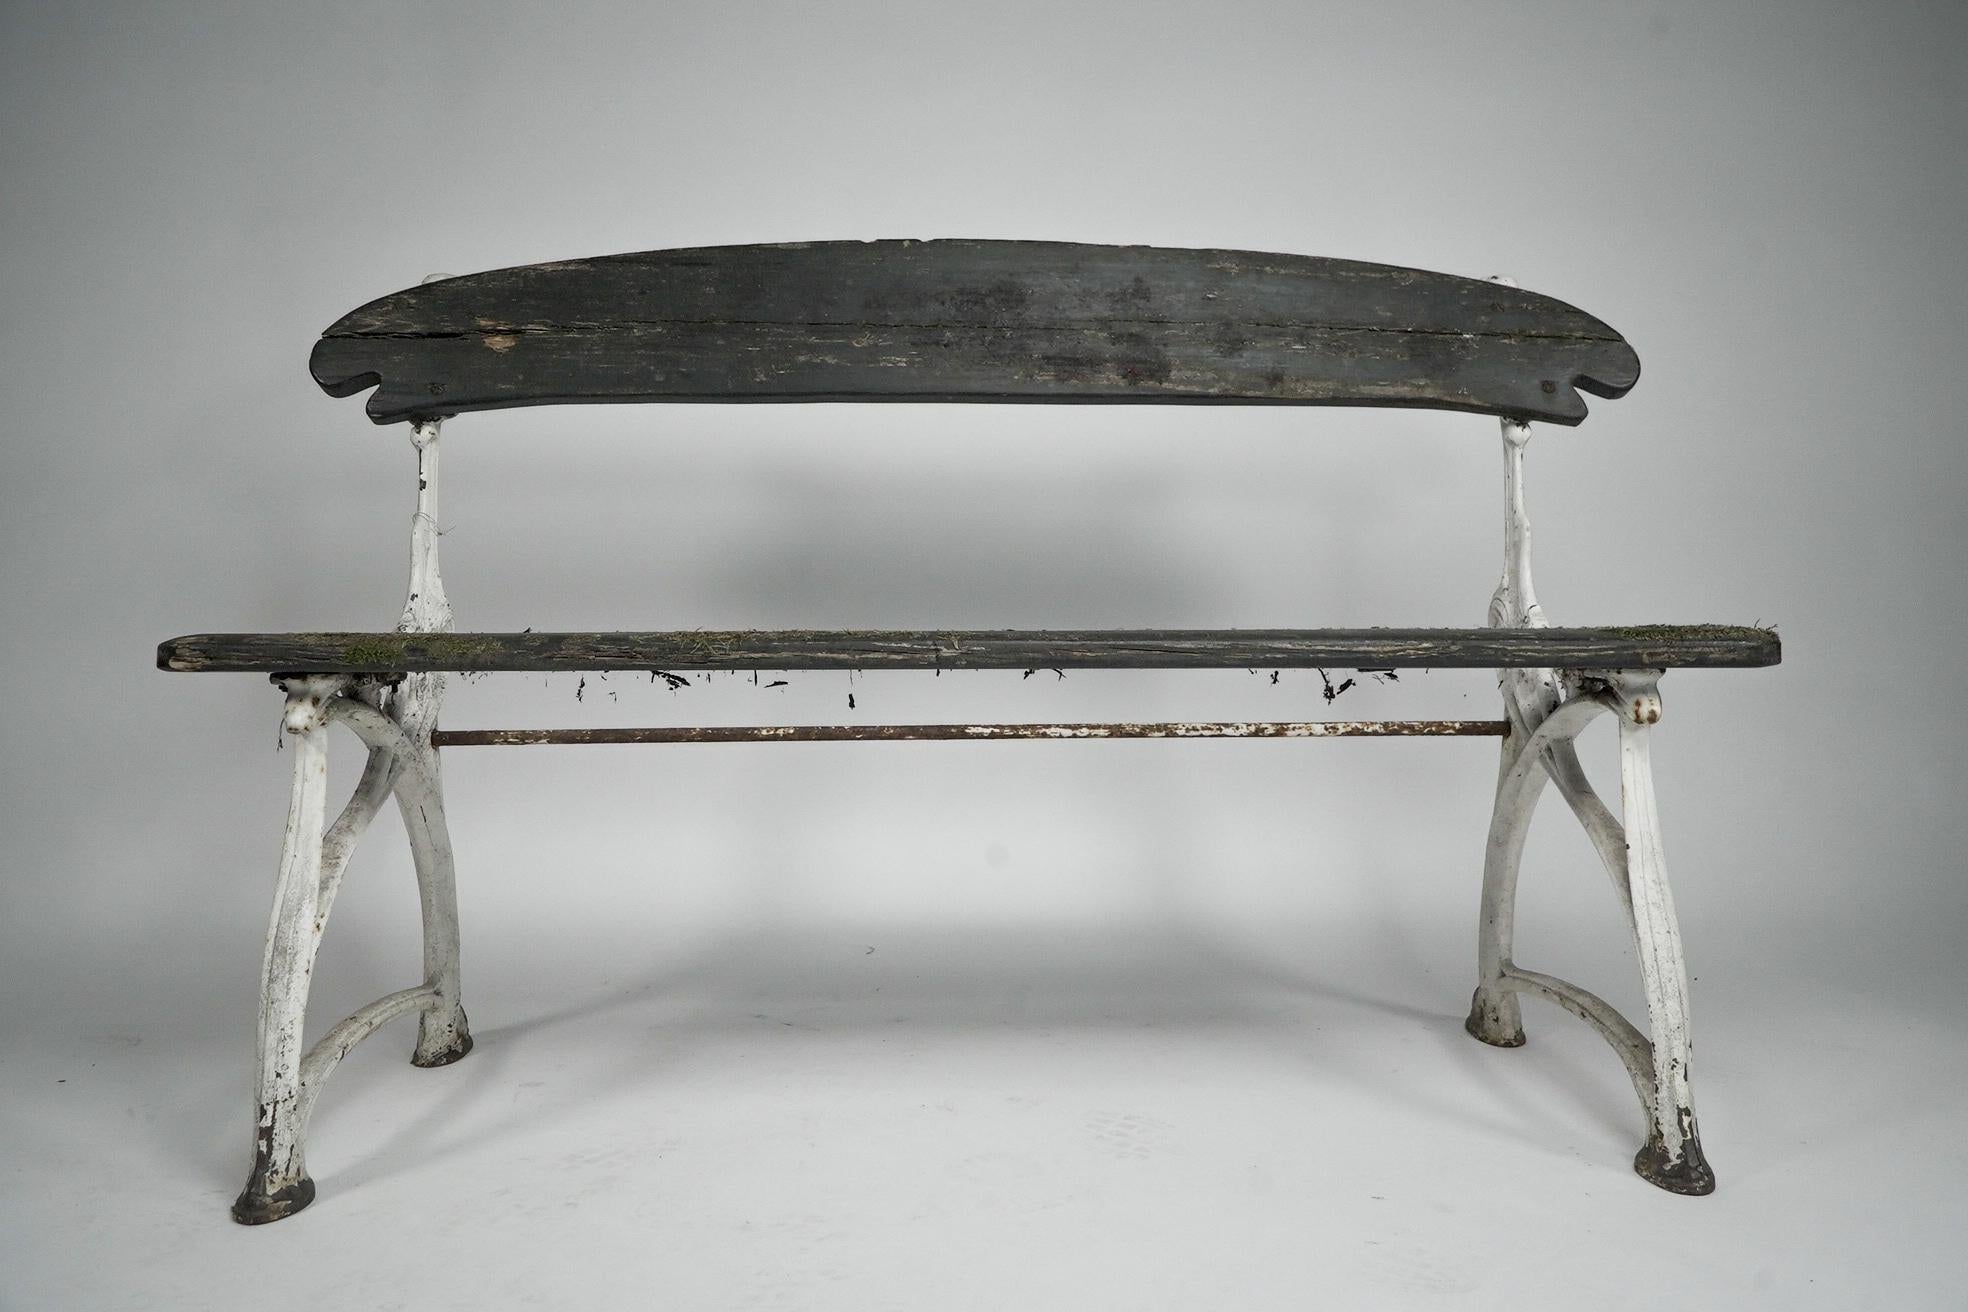 Hector Guimard, Cast iron garden bench.
A rare example retaining its original Art Nouveau wooden seat. It is important to note that the original wooden seat and back show complete purity in its original intended design. Examples with modern